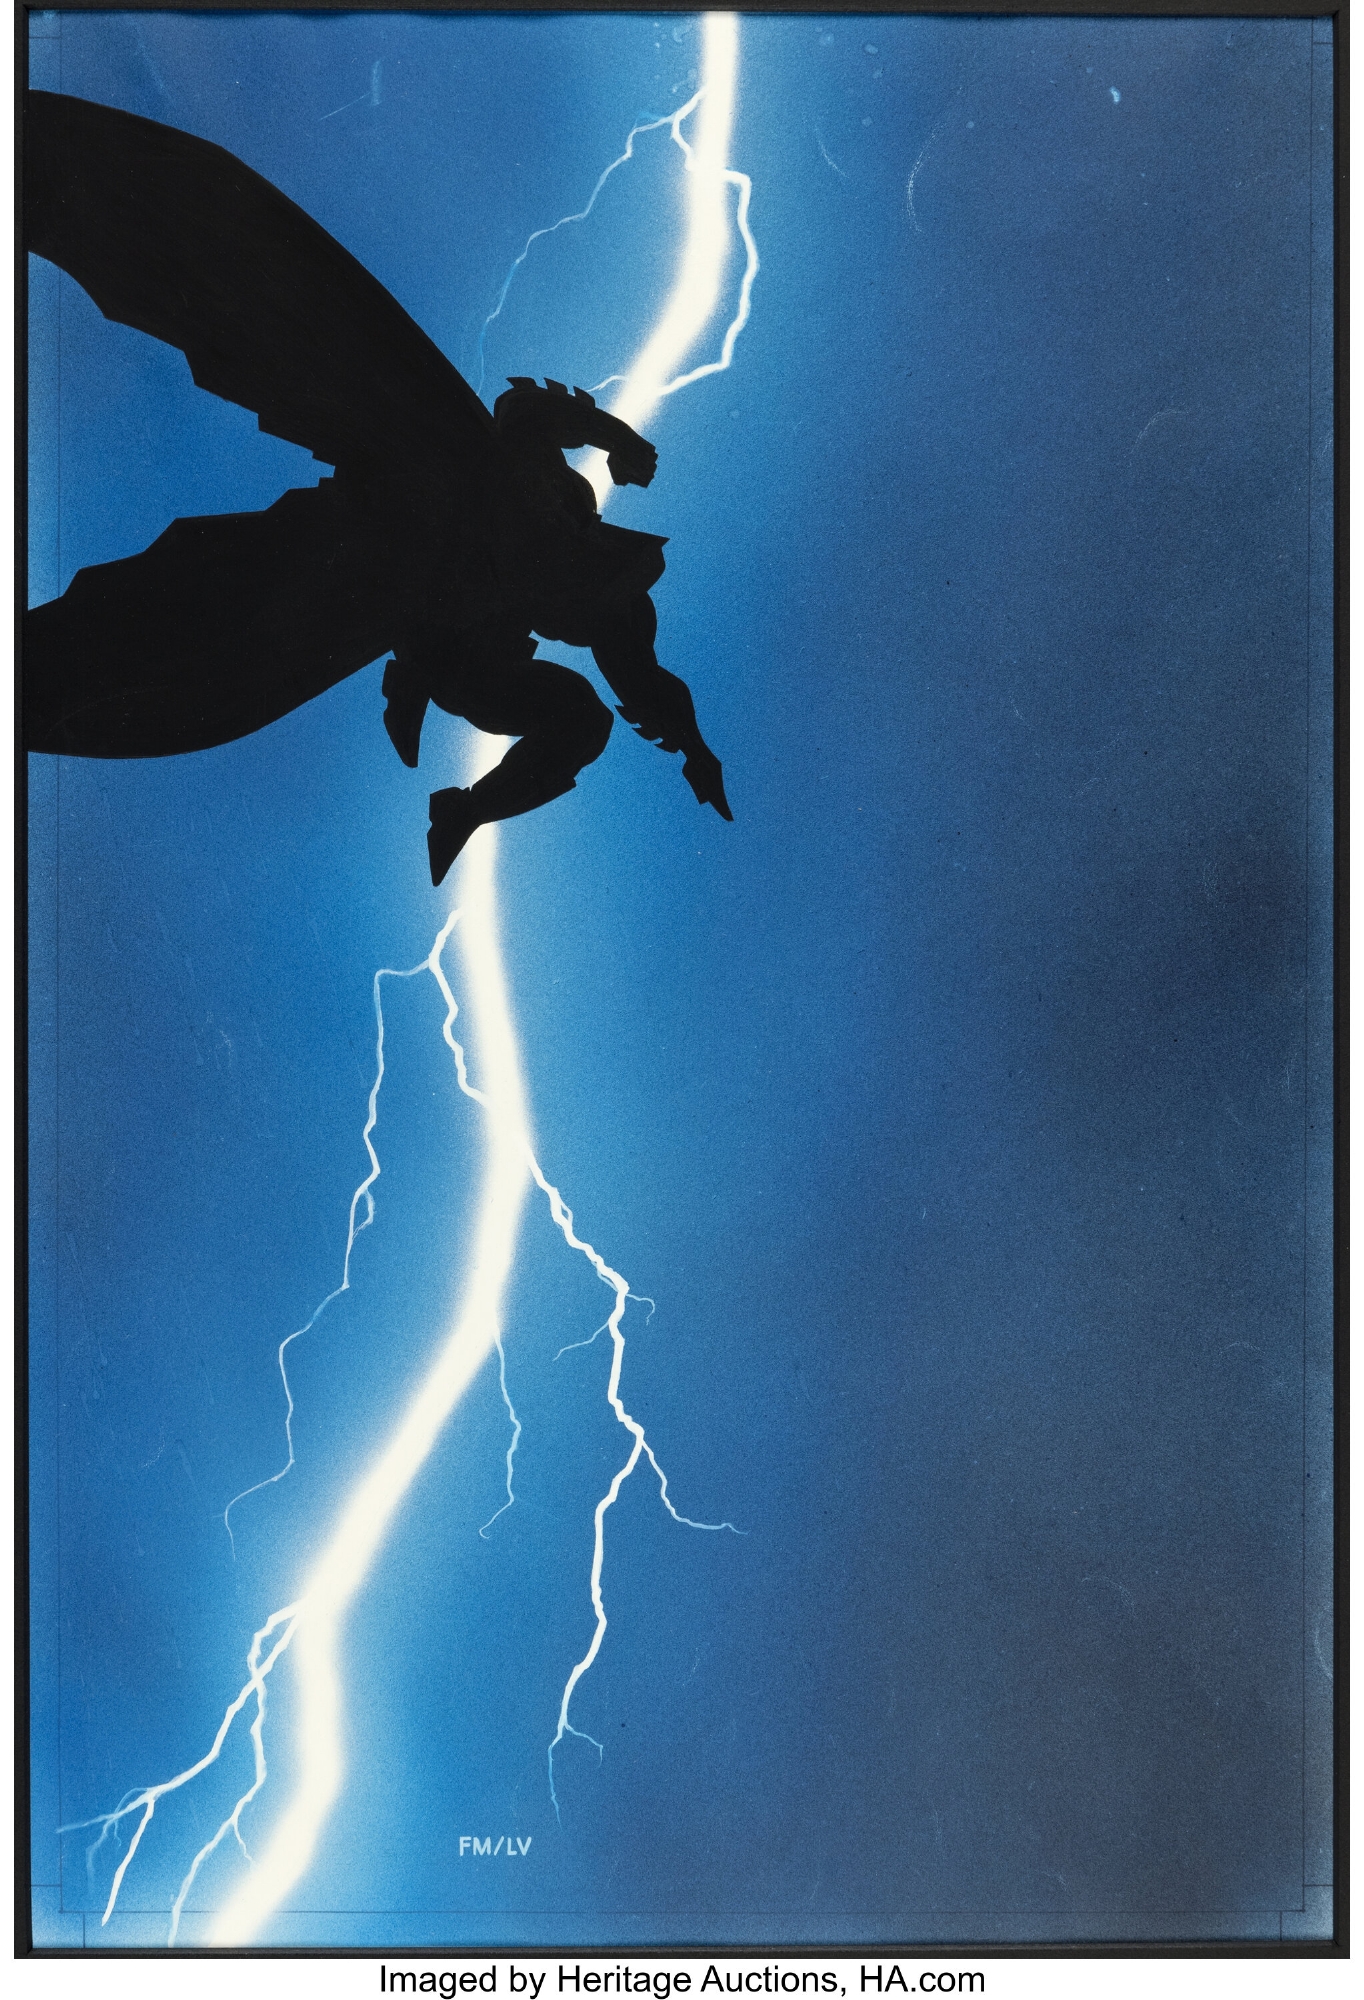 Batman: The Dark Knight Returns #1 (DC, 1986), in Heritage Auctions  Previews's Hall of Fame Comic Art Gallery Room